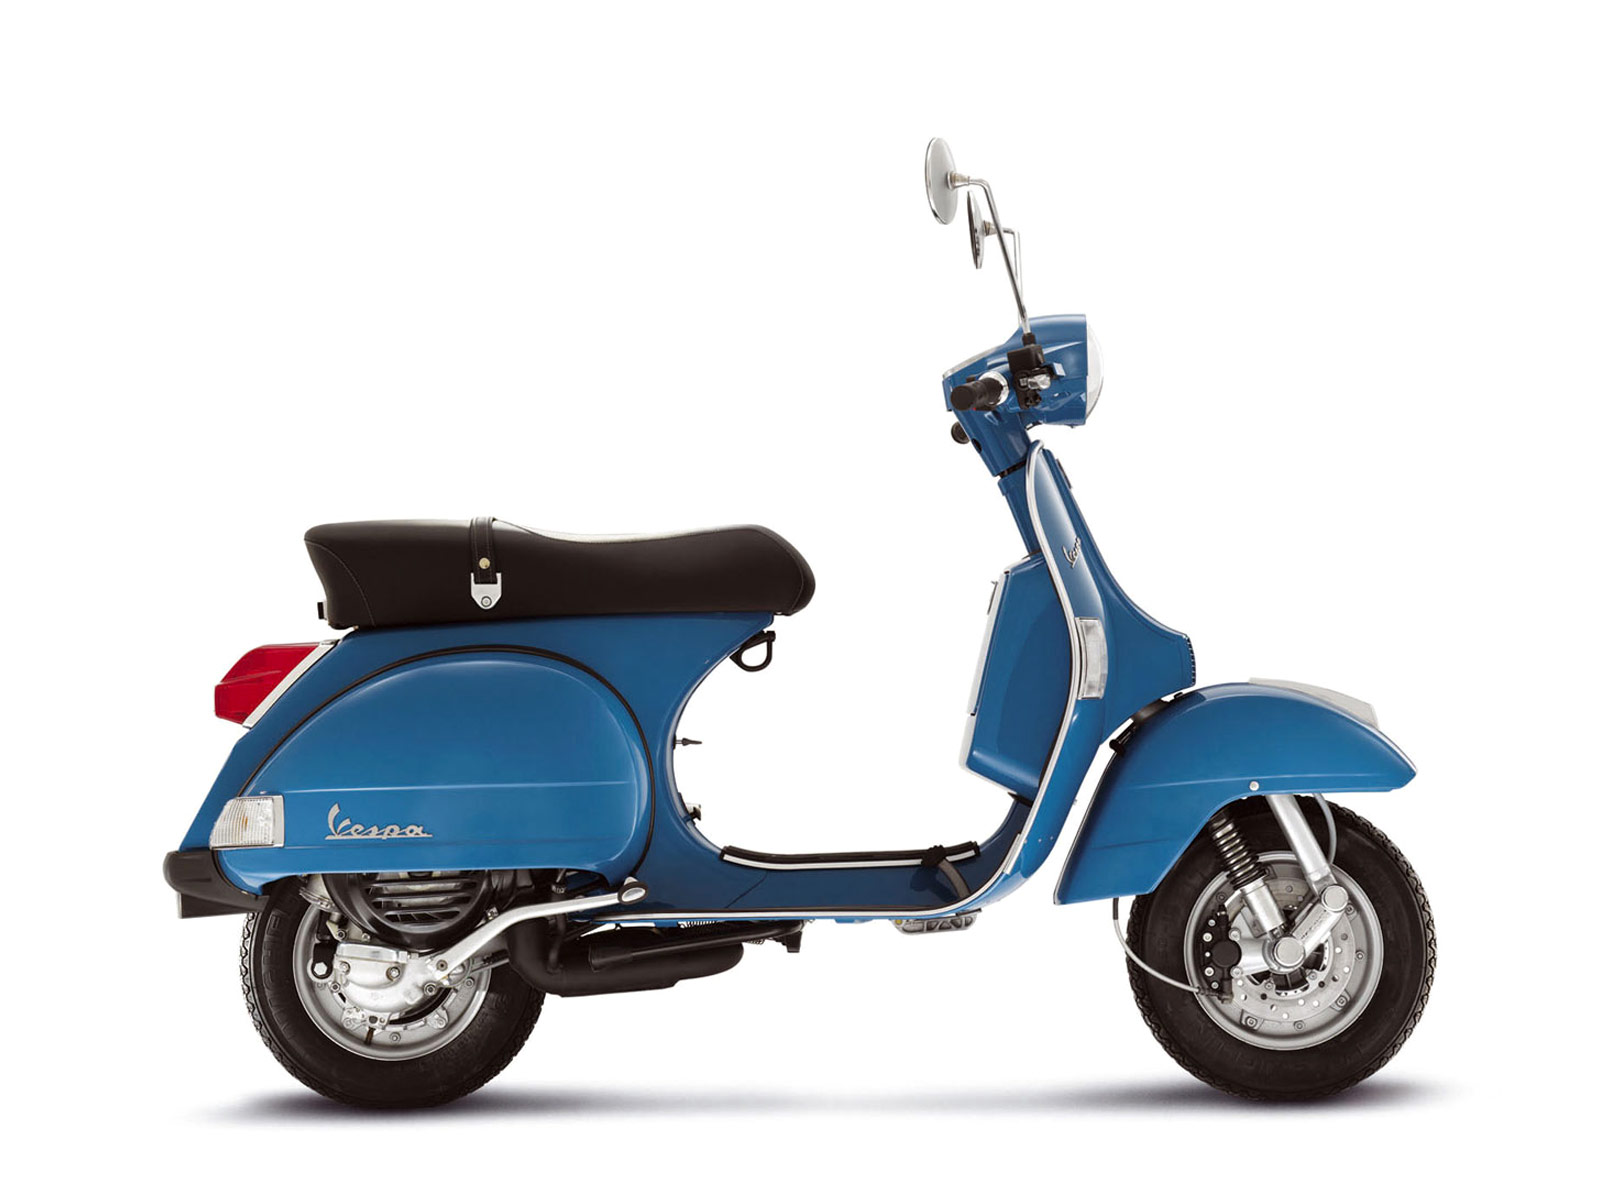 VESPA PX 150 wallpapers 2011 | accident lawyers information.